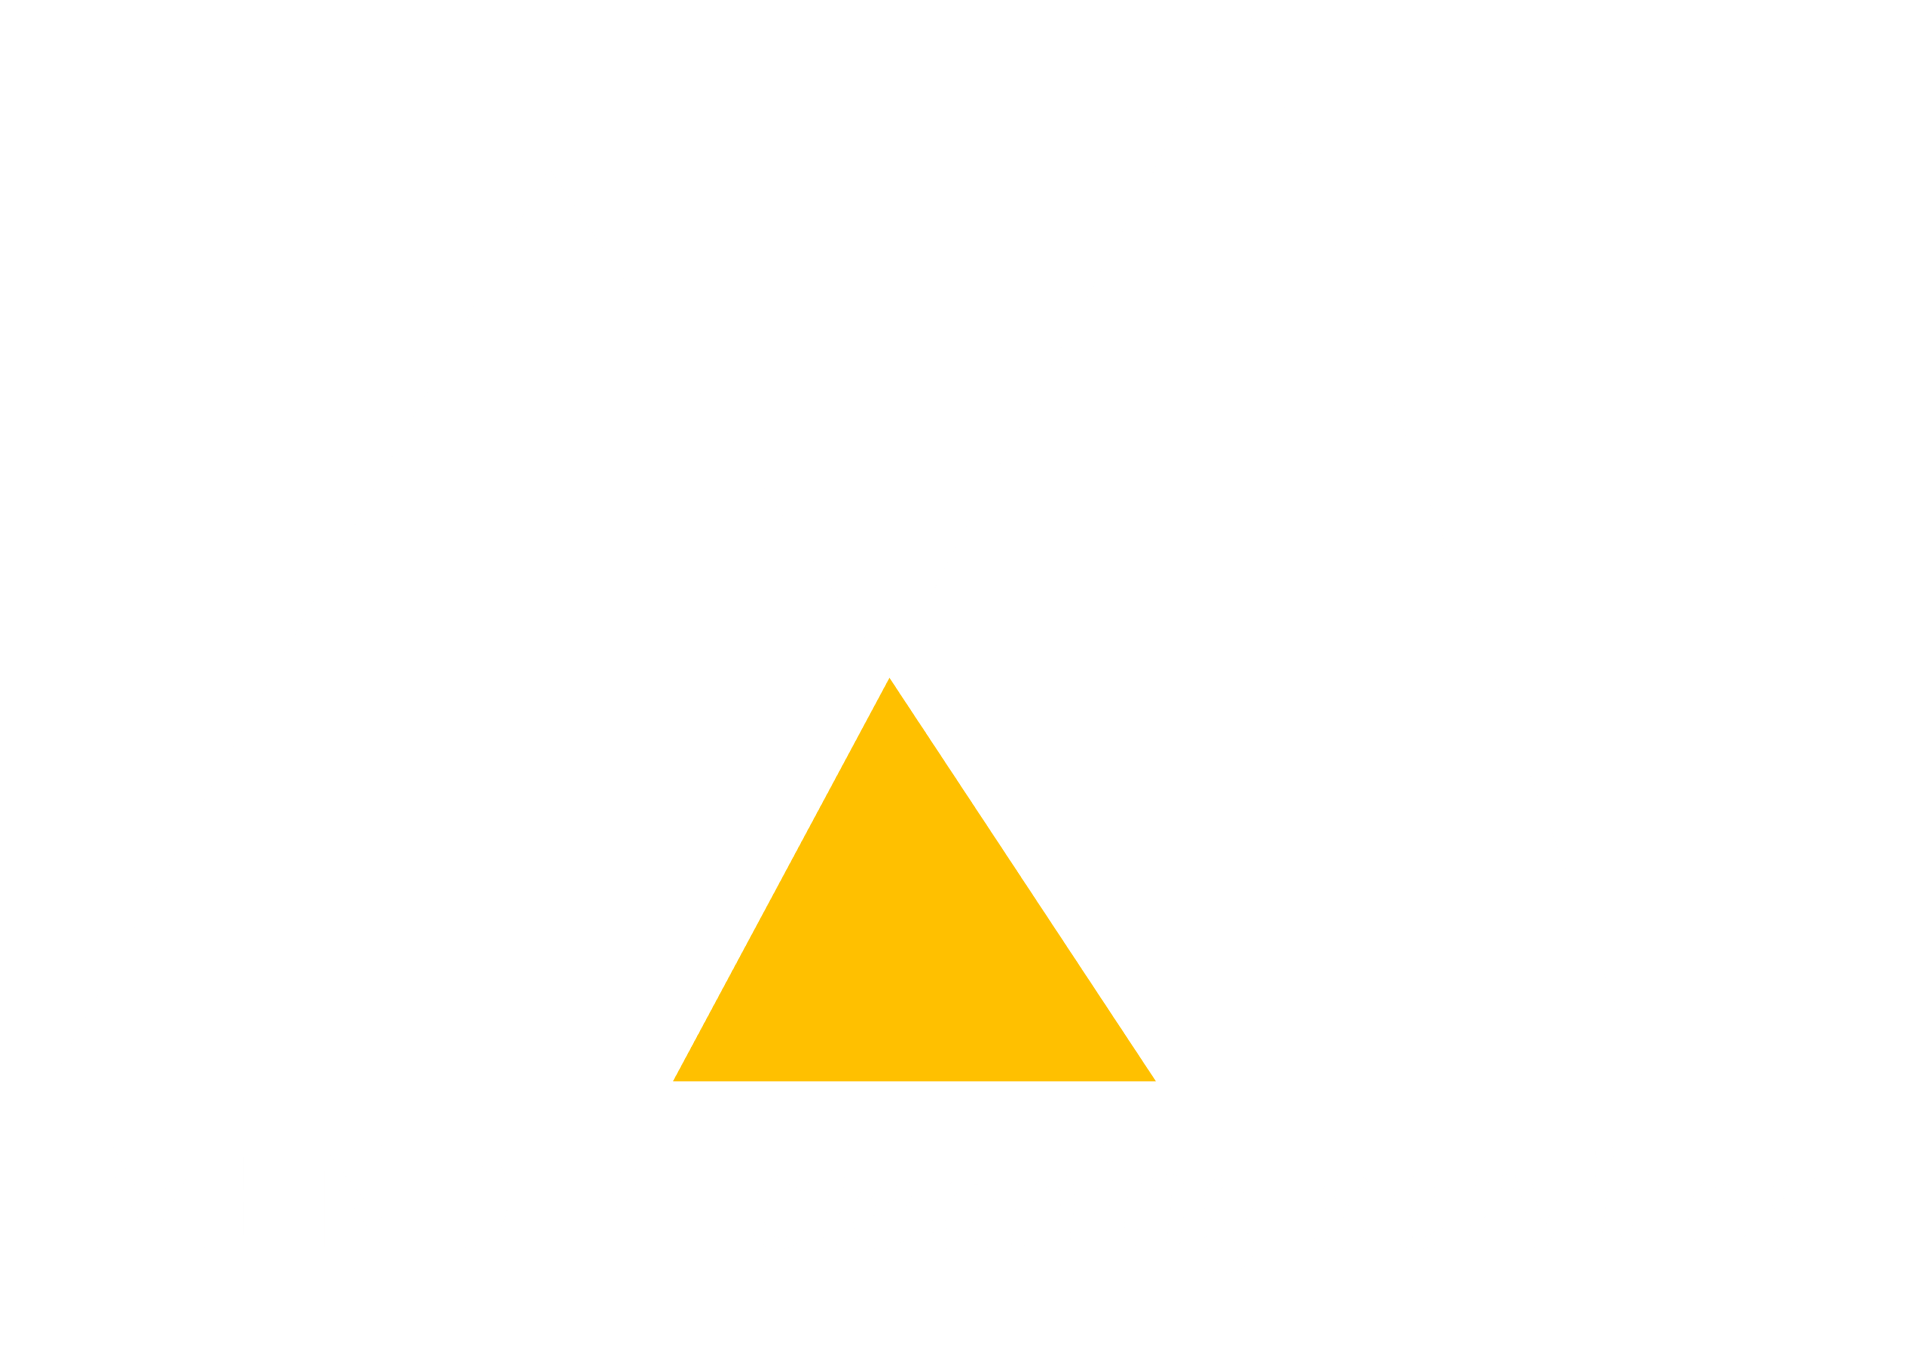 Mendip Cleaning Services